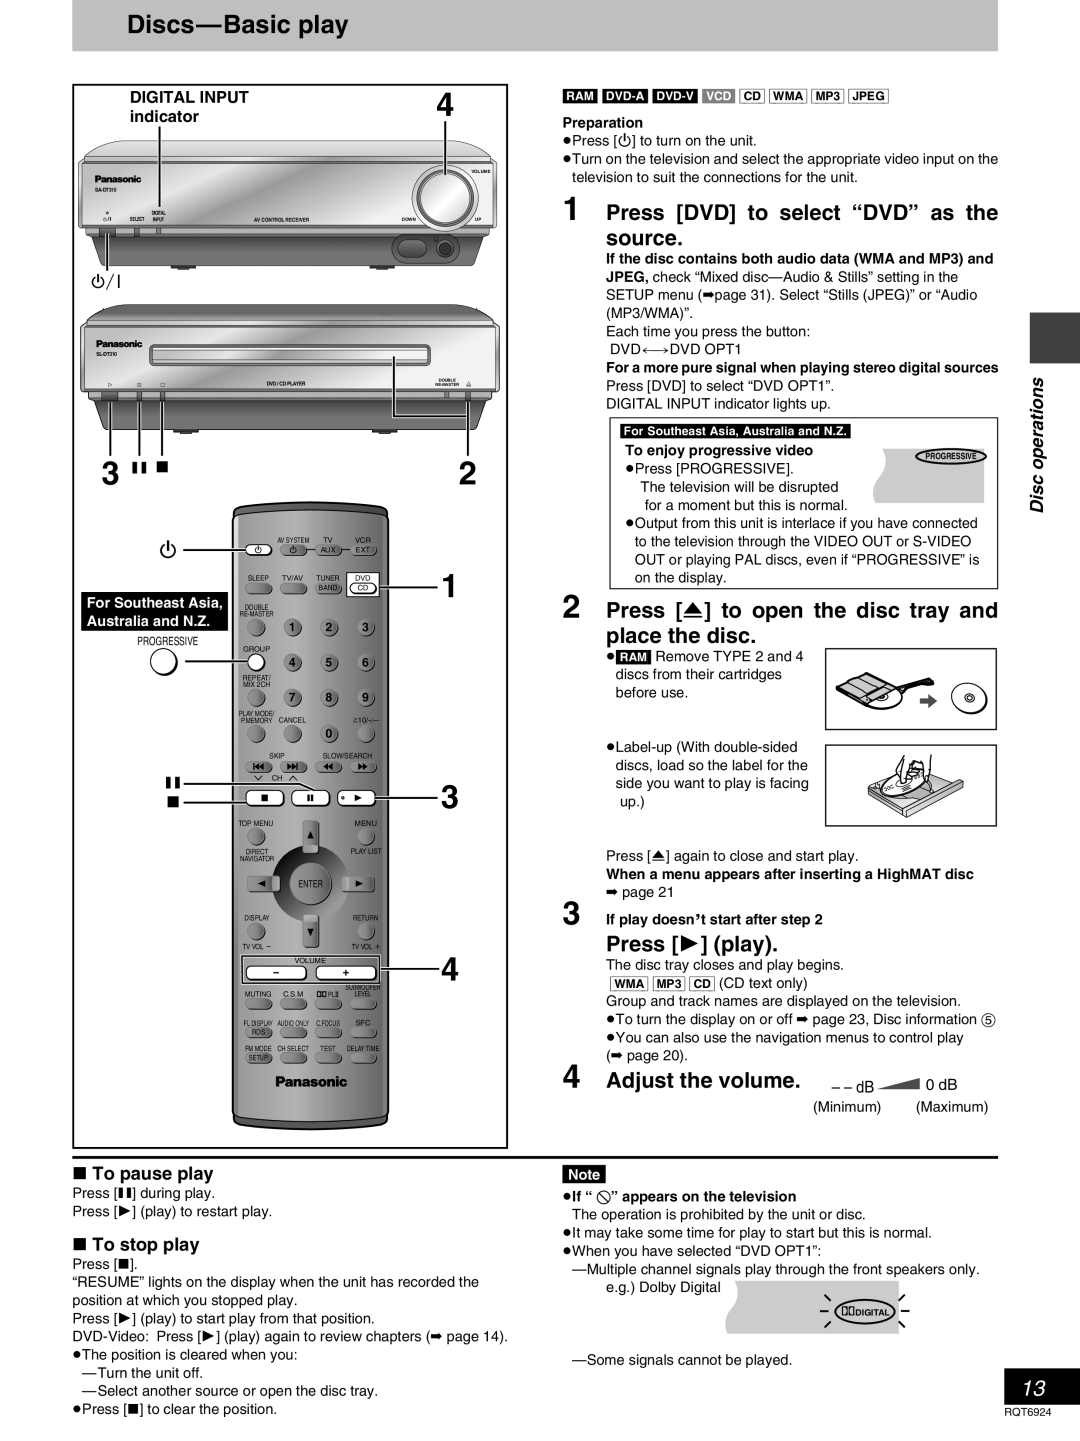 Panasonic SC-DT310 manual Discs-Basicplay, Press DVD to select “DVD” as the source, Press 1 play, Adjust the volume. - - dB 